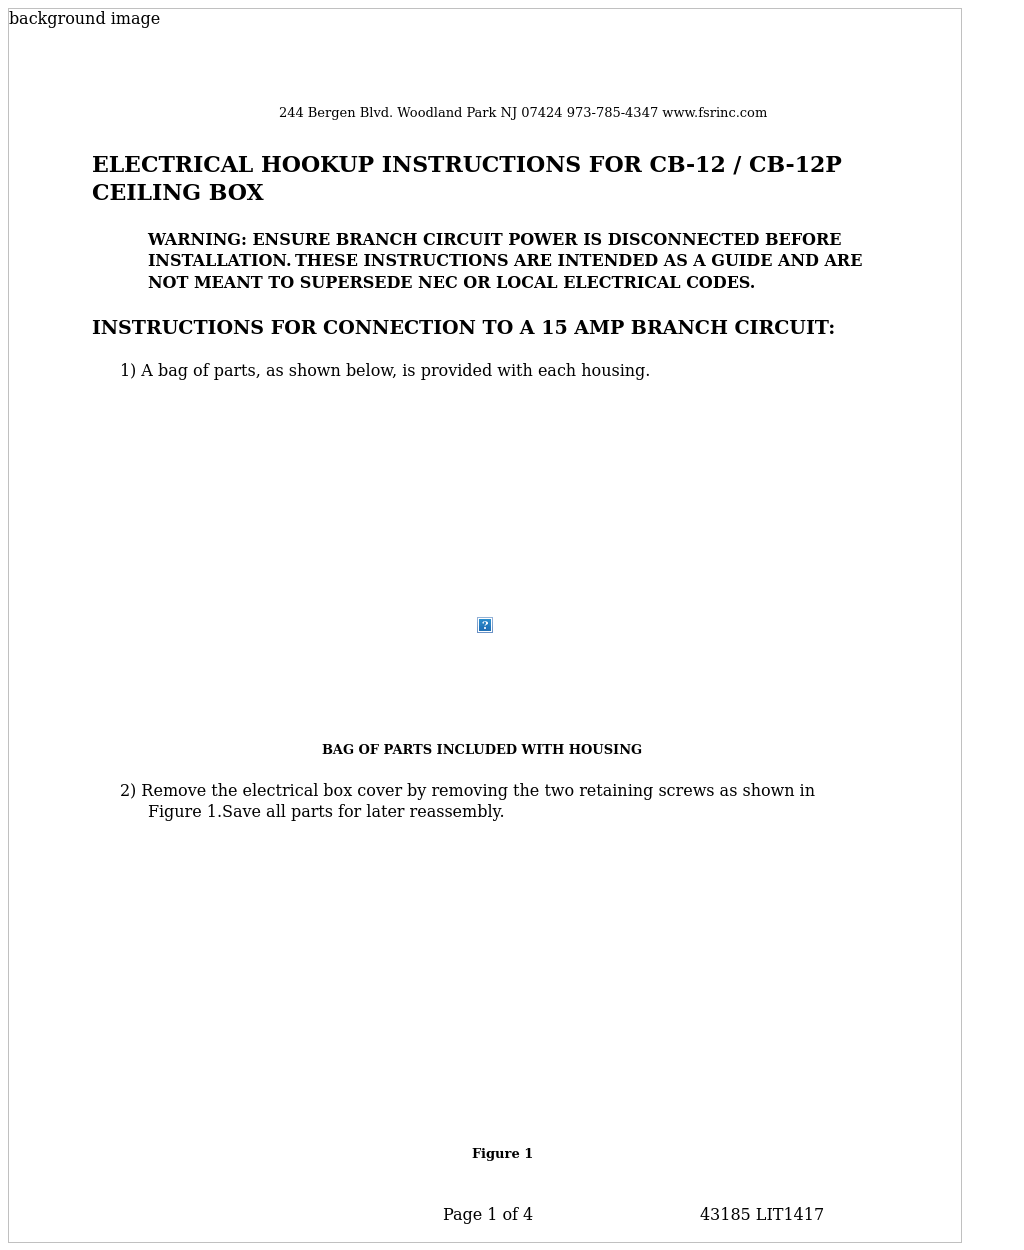 CB-12 / CB-12P ELECTRICAL HOOKUP INSTRUCTIONS